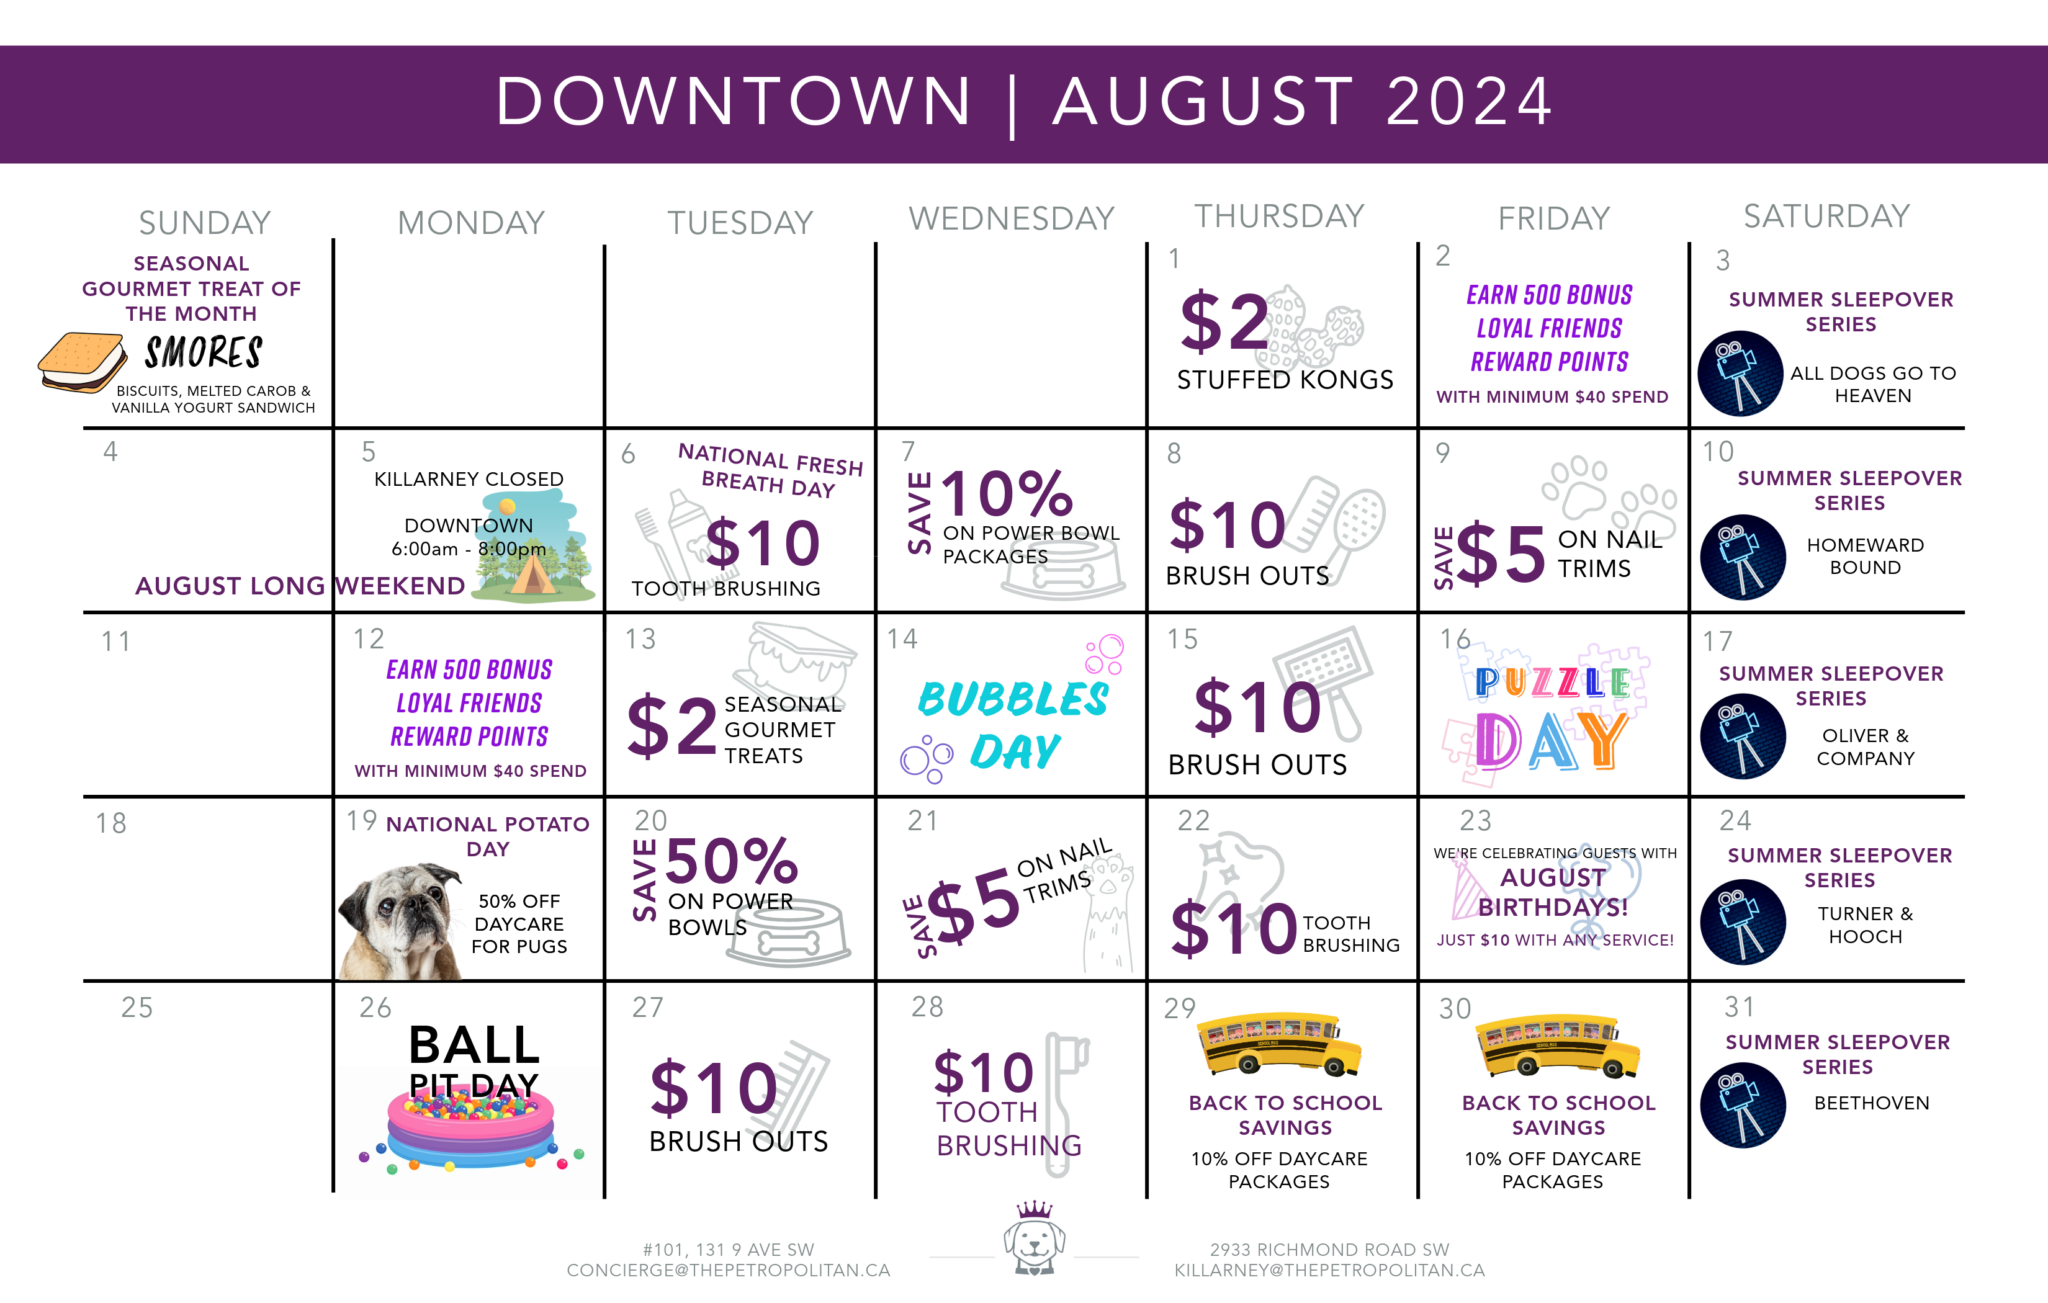 Event and Savings | Downtown August 2024